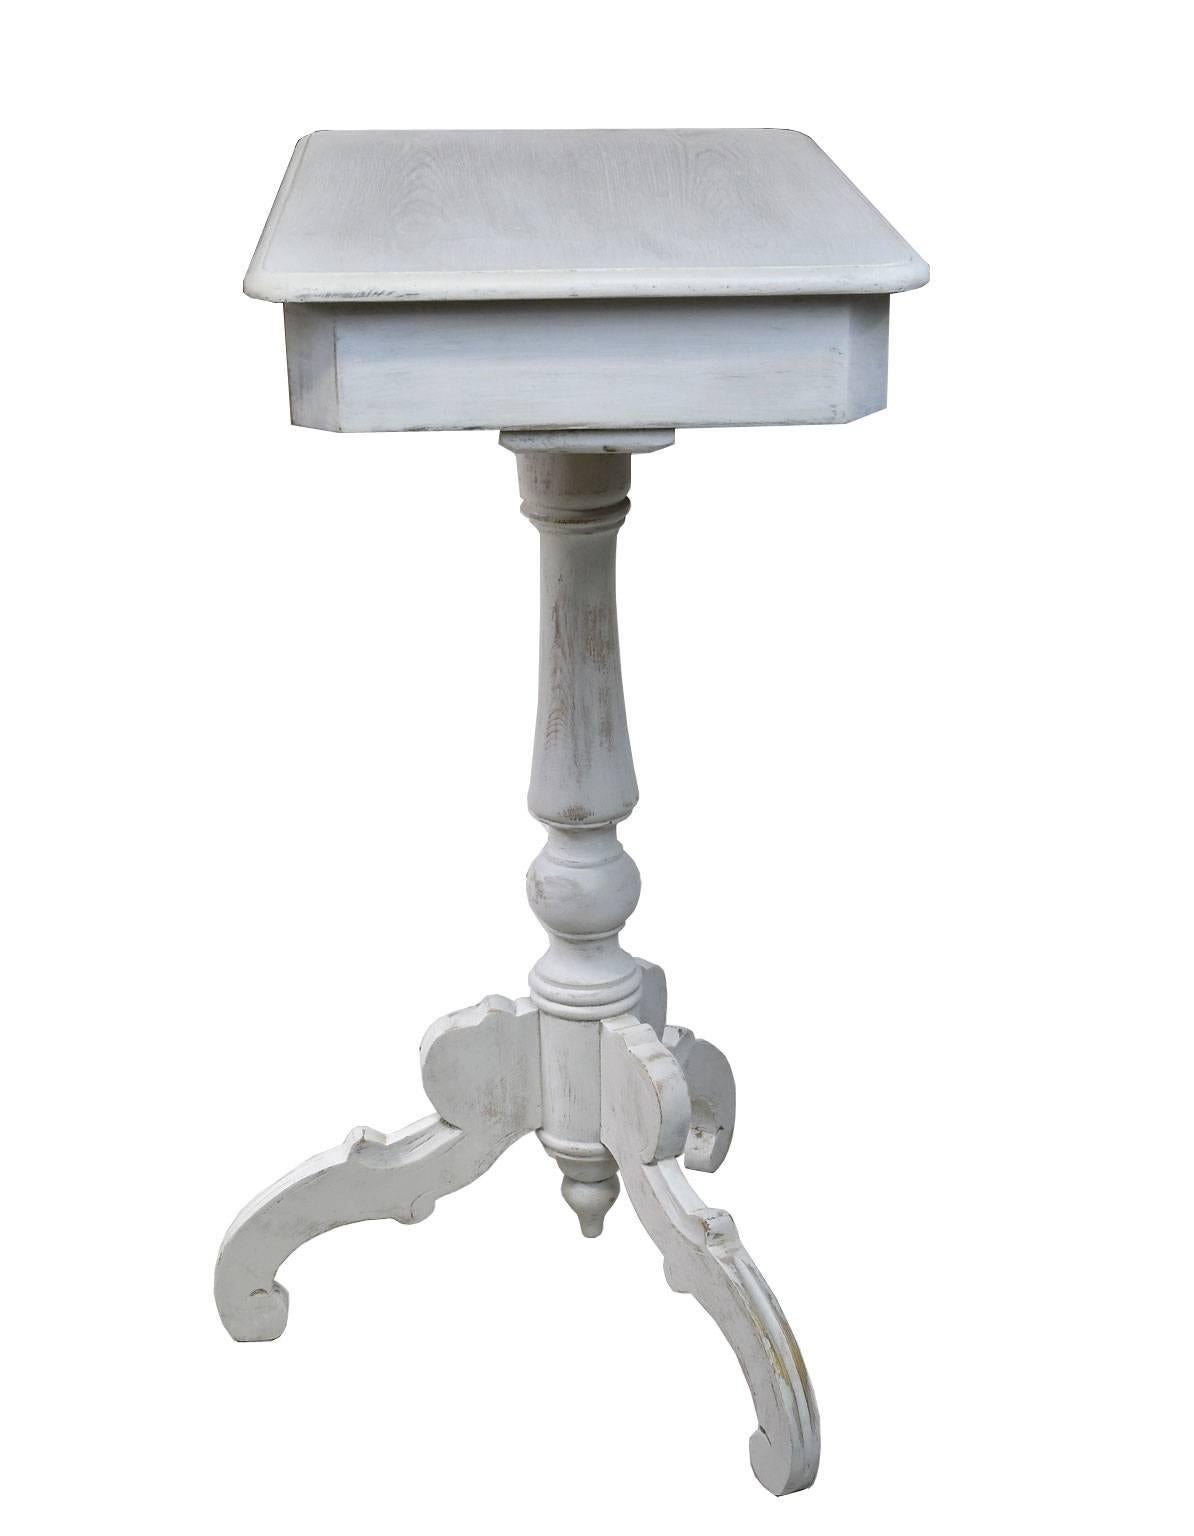 Swedish Gustavian End Table on Tri-foot Pedestal w/ Grey/White Paint, c. 1825 In Good Condition For Sale In Miami, FL